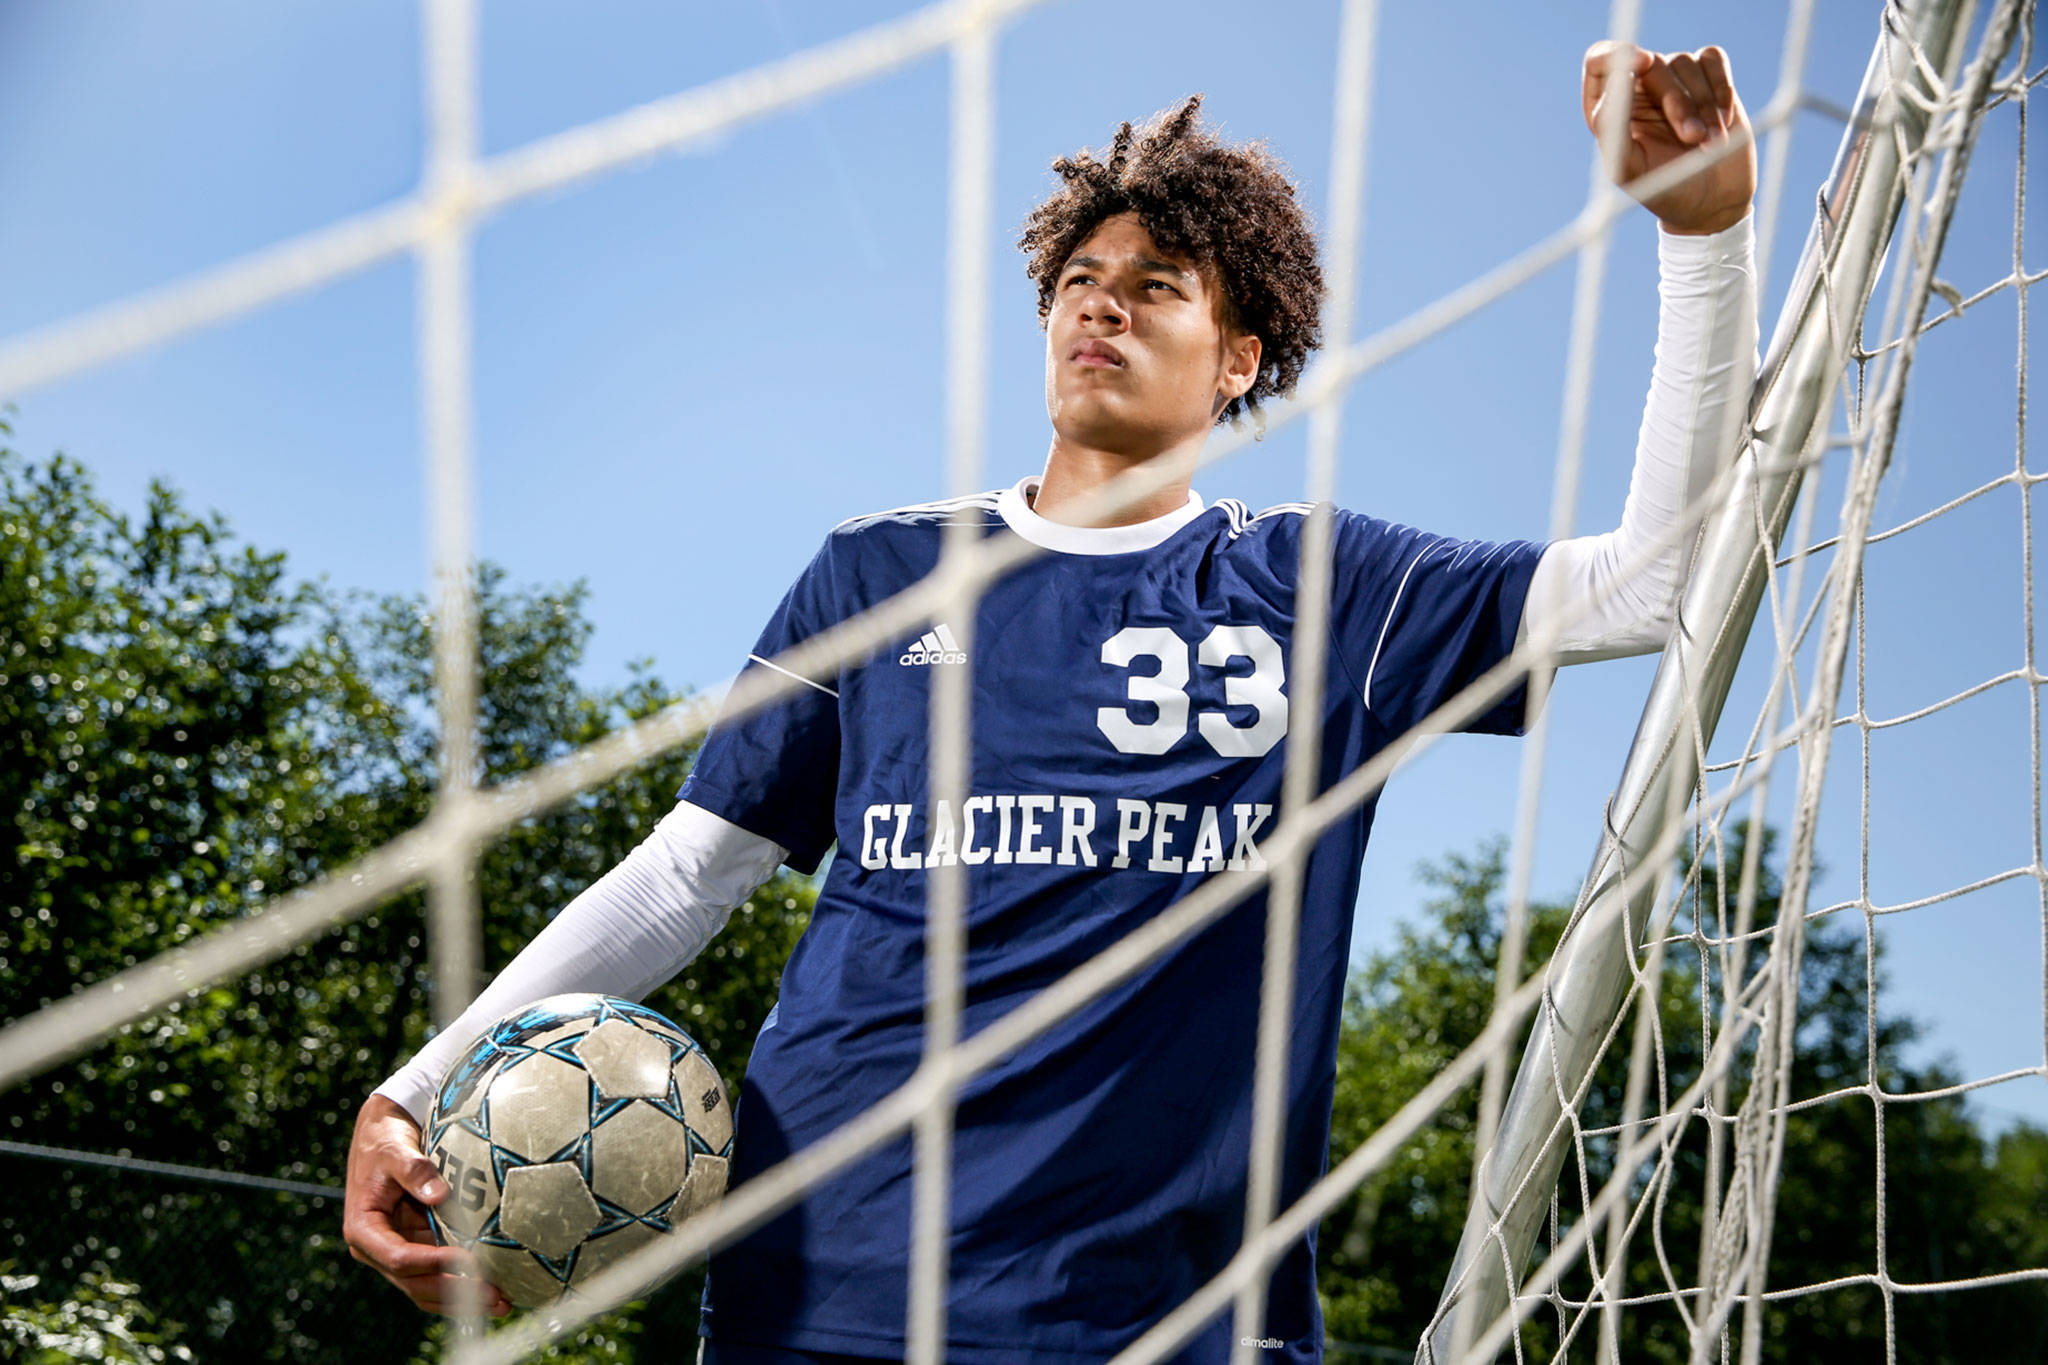 Glacier Peak sophomore Azavier Coppin scored 17 goals in the abbreviated season and is The Herald’s 2021 Boys Soccer Player of the Year. (Kevin Clark / The Herald)